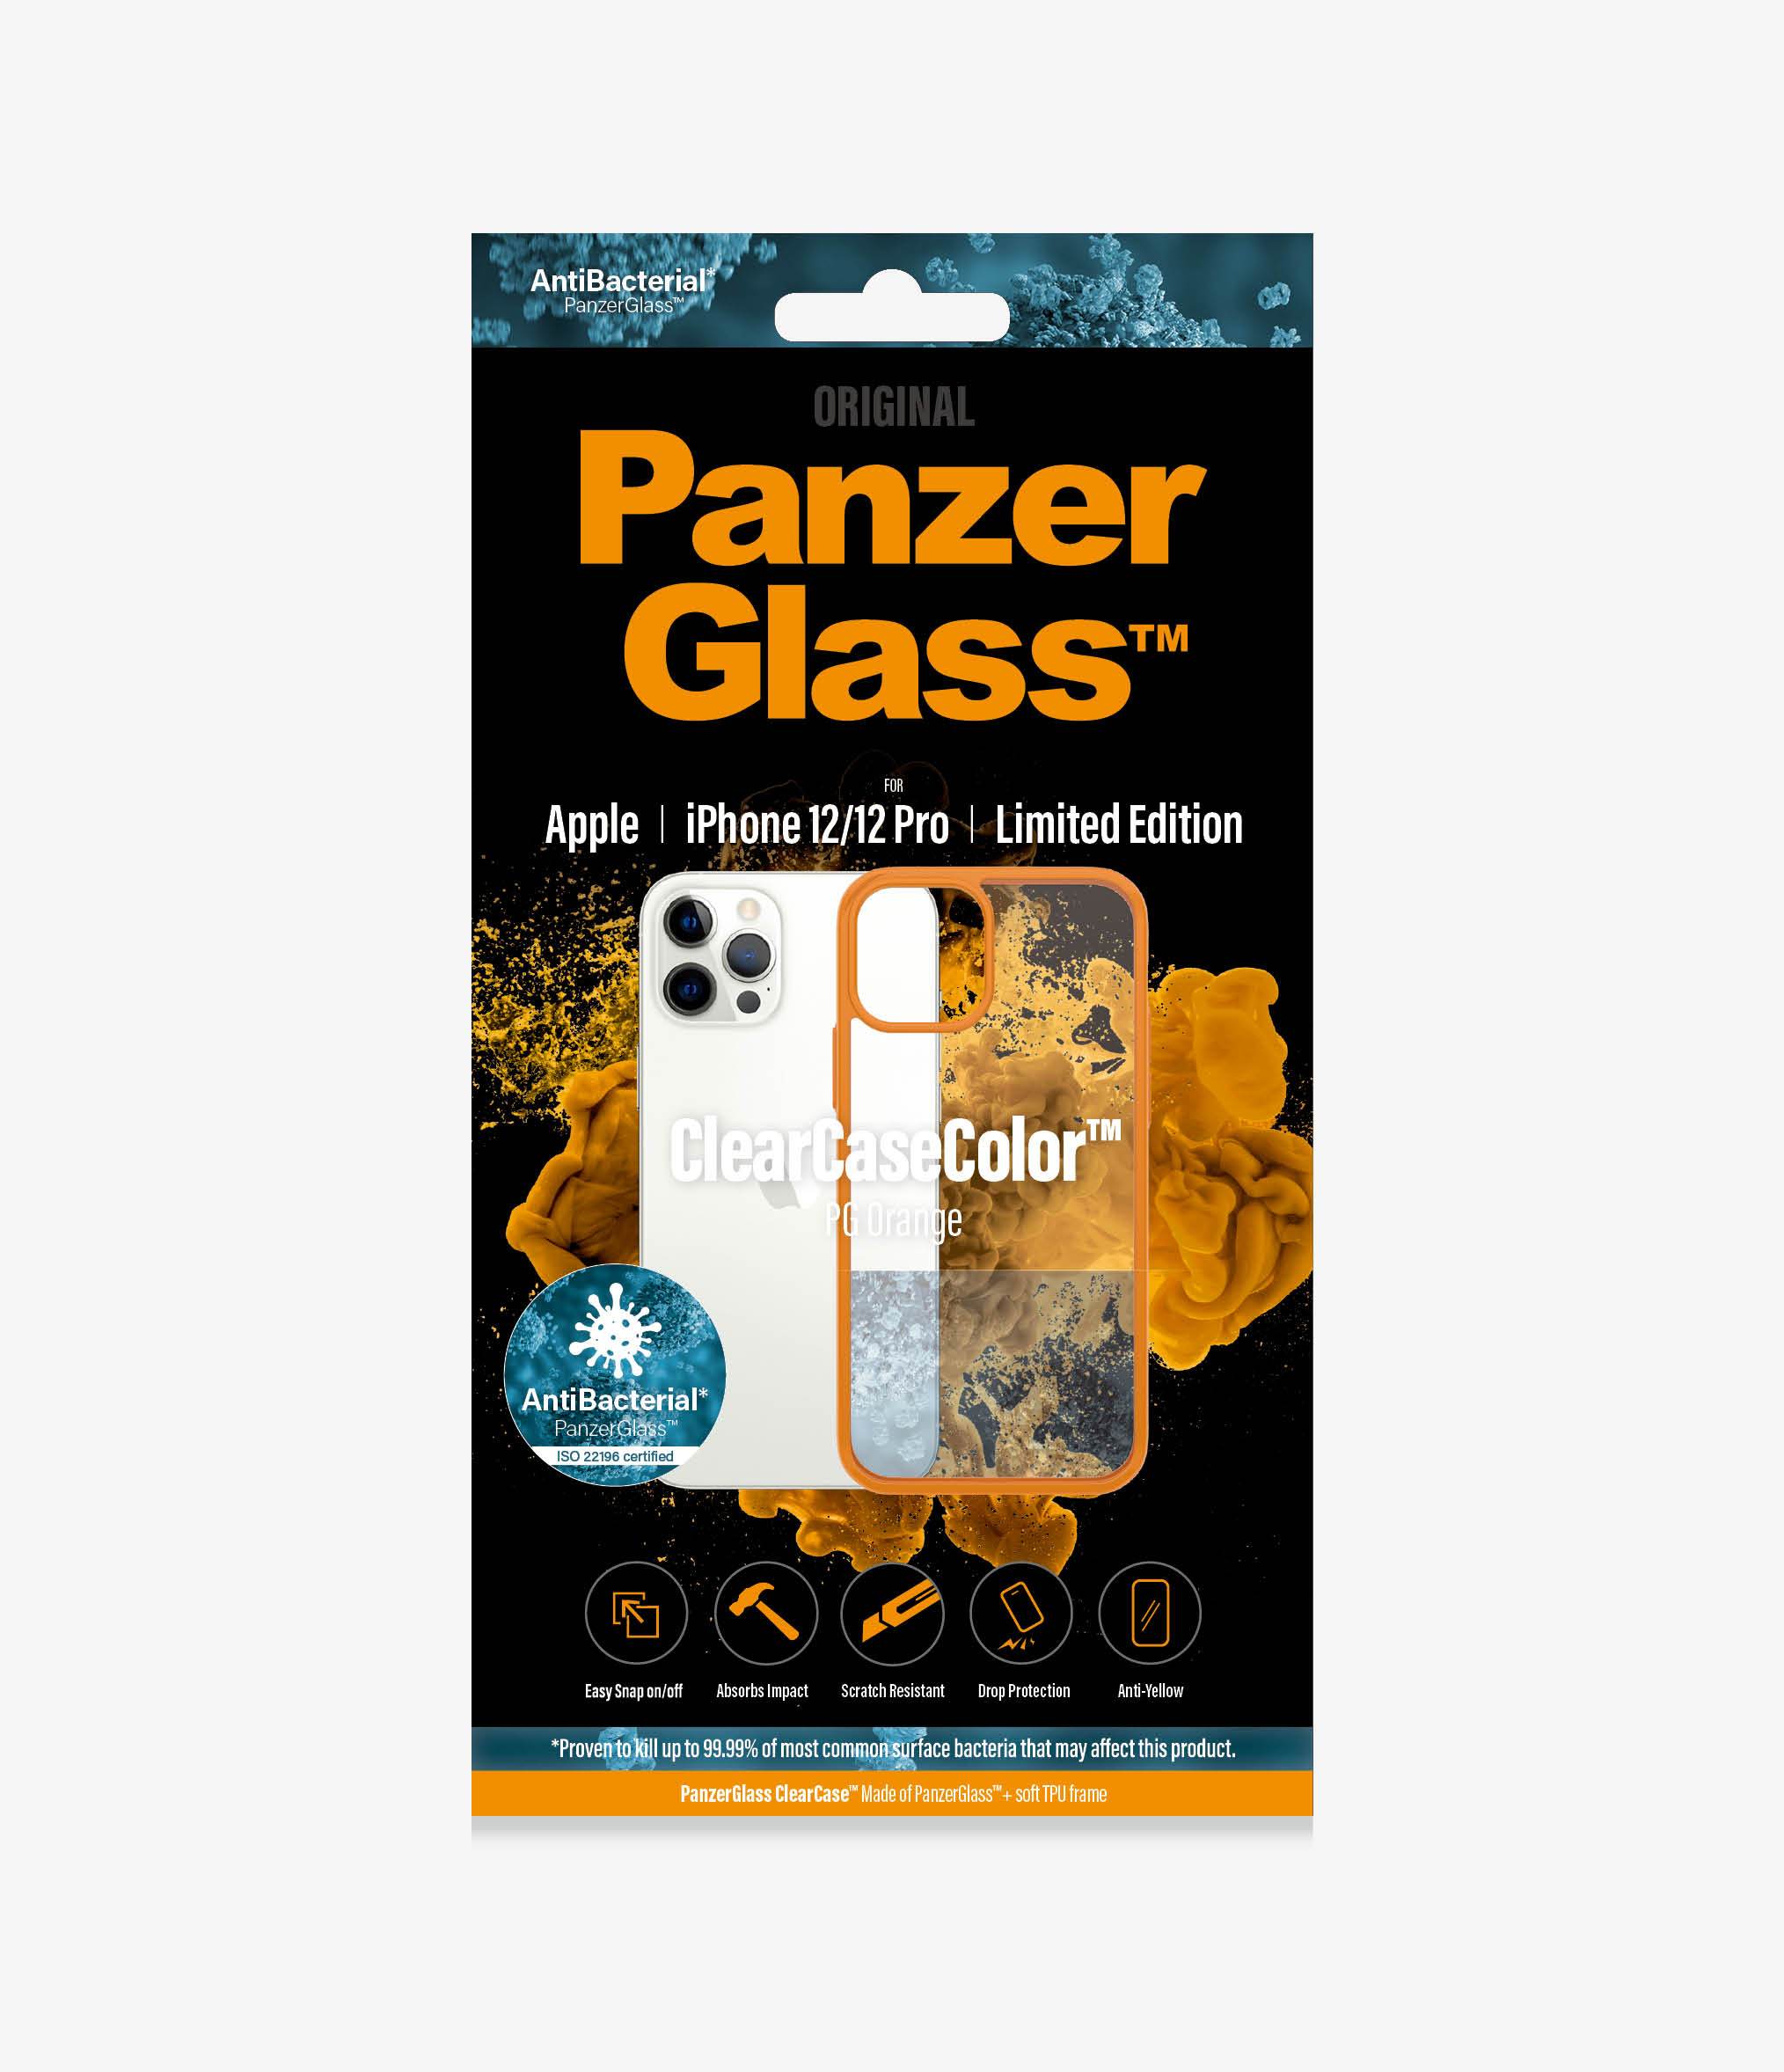 PanzerGlass™ ClearCaseColor™ Apple iPhone 12/12 Pro - PanzerGlass Orange Limited Edition (0283), Tempered anti-aging glass back, enhance protection